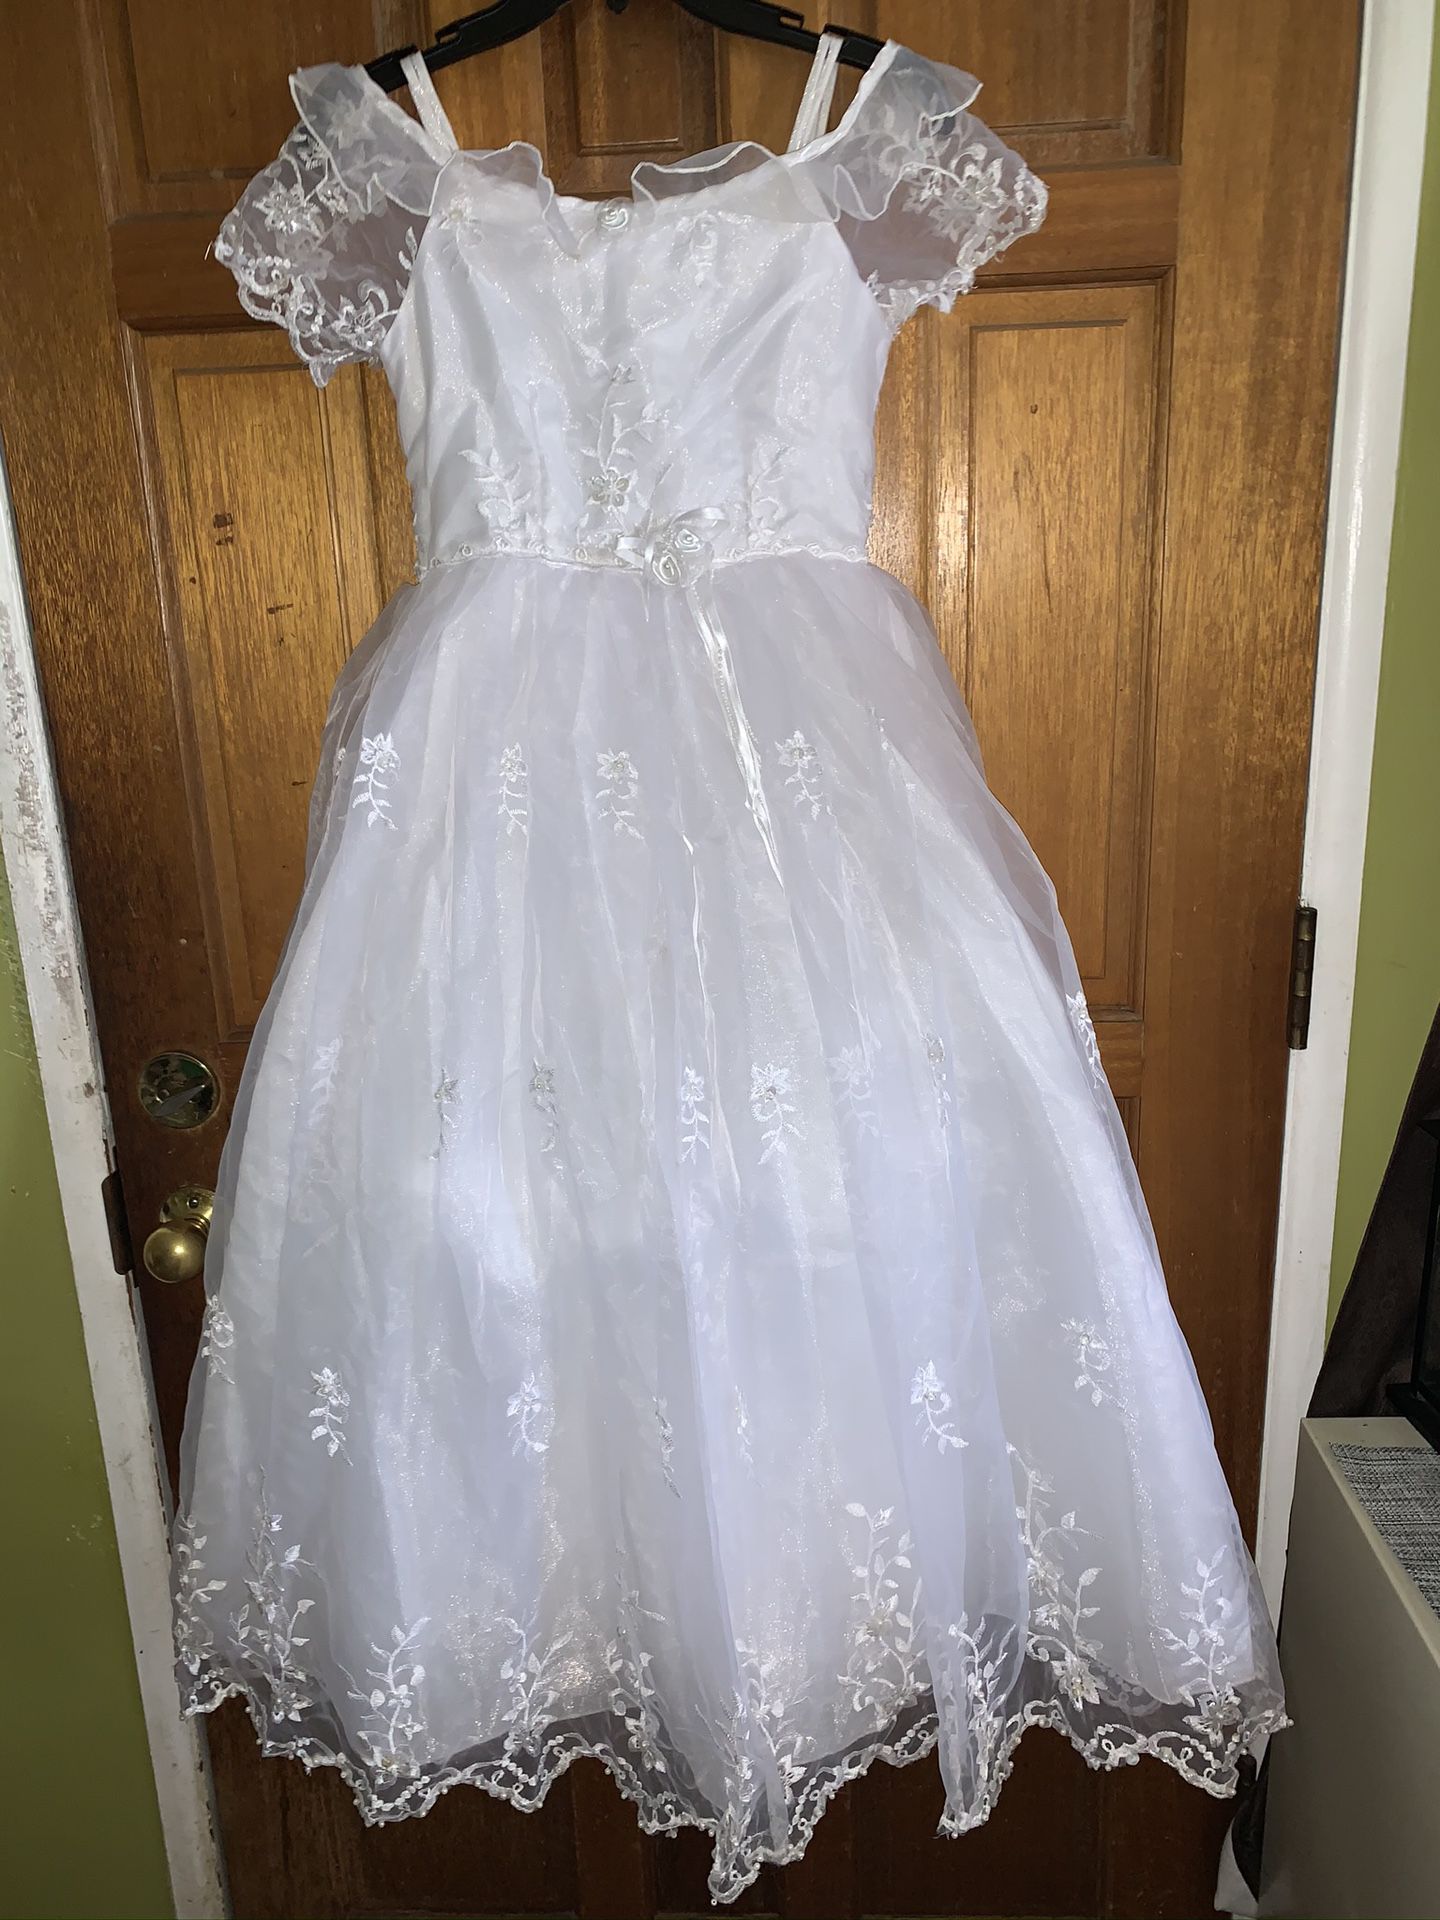 Flower Girl Dress or can be used for other occasions size 8